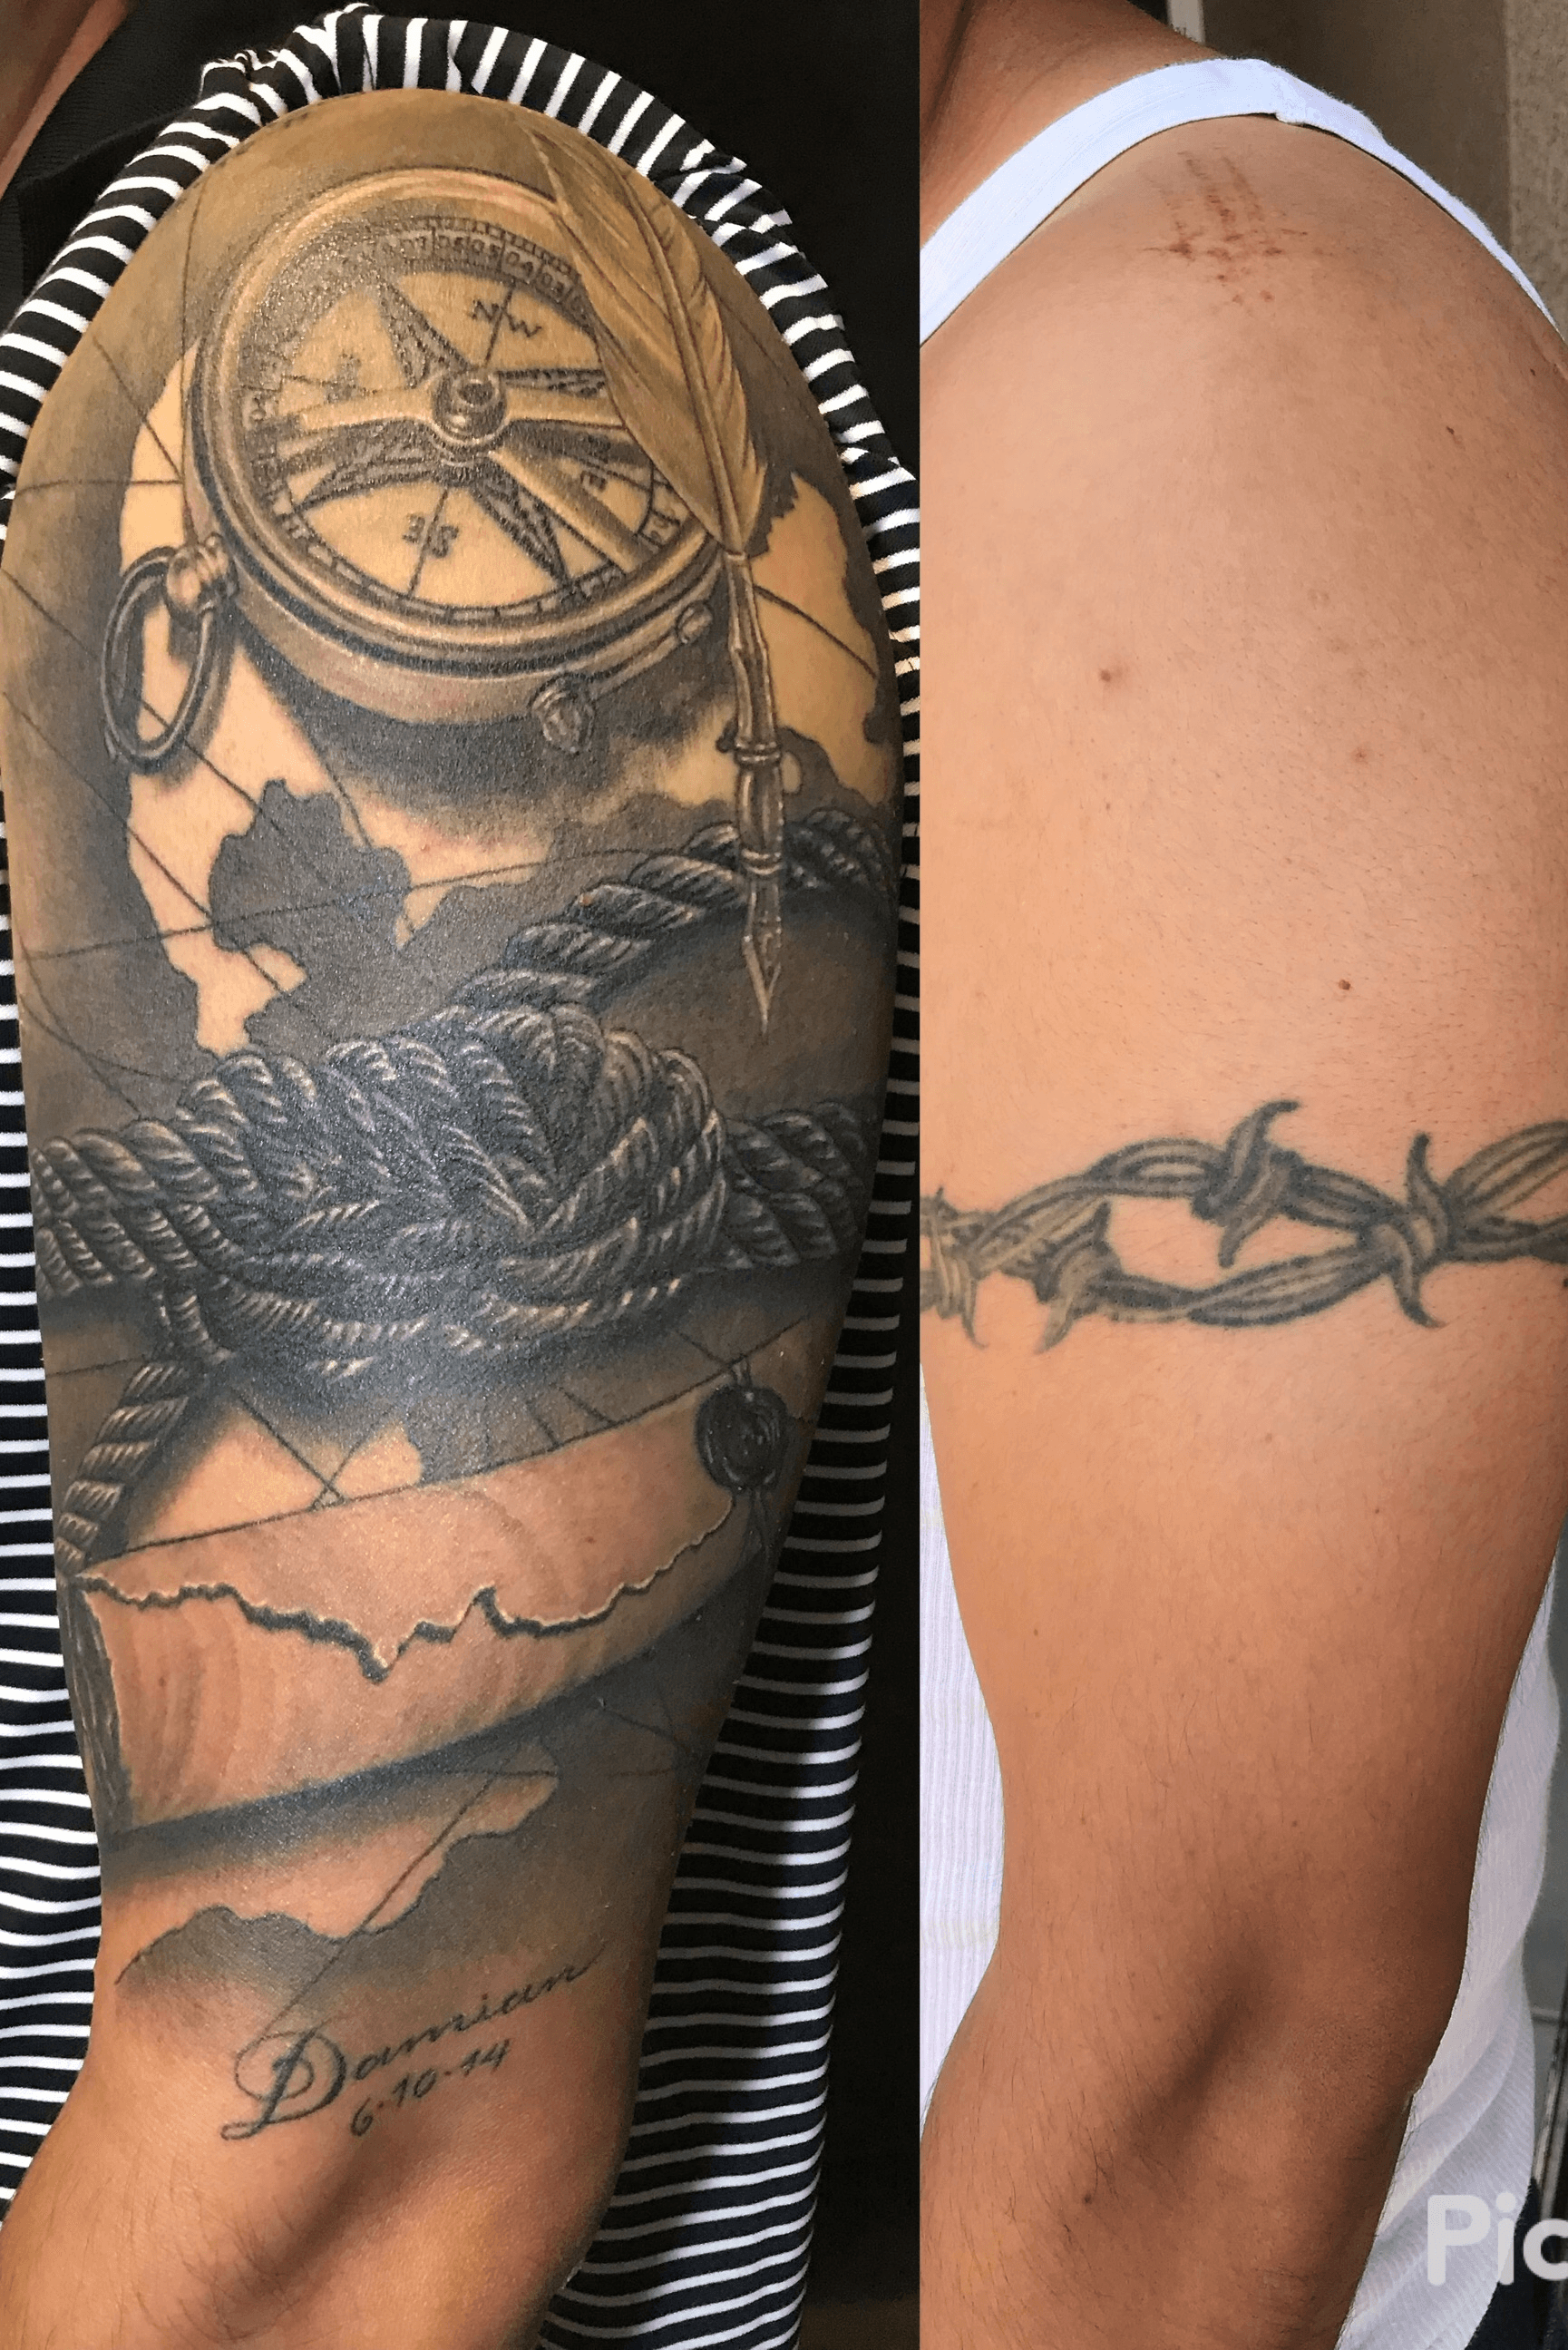 Details 64 barb wire sleeve tattoo super hot  thtantai2